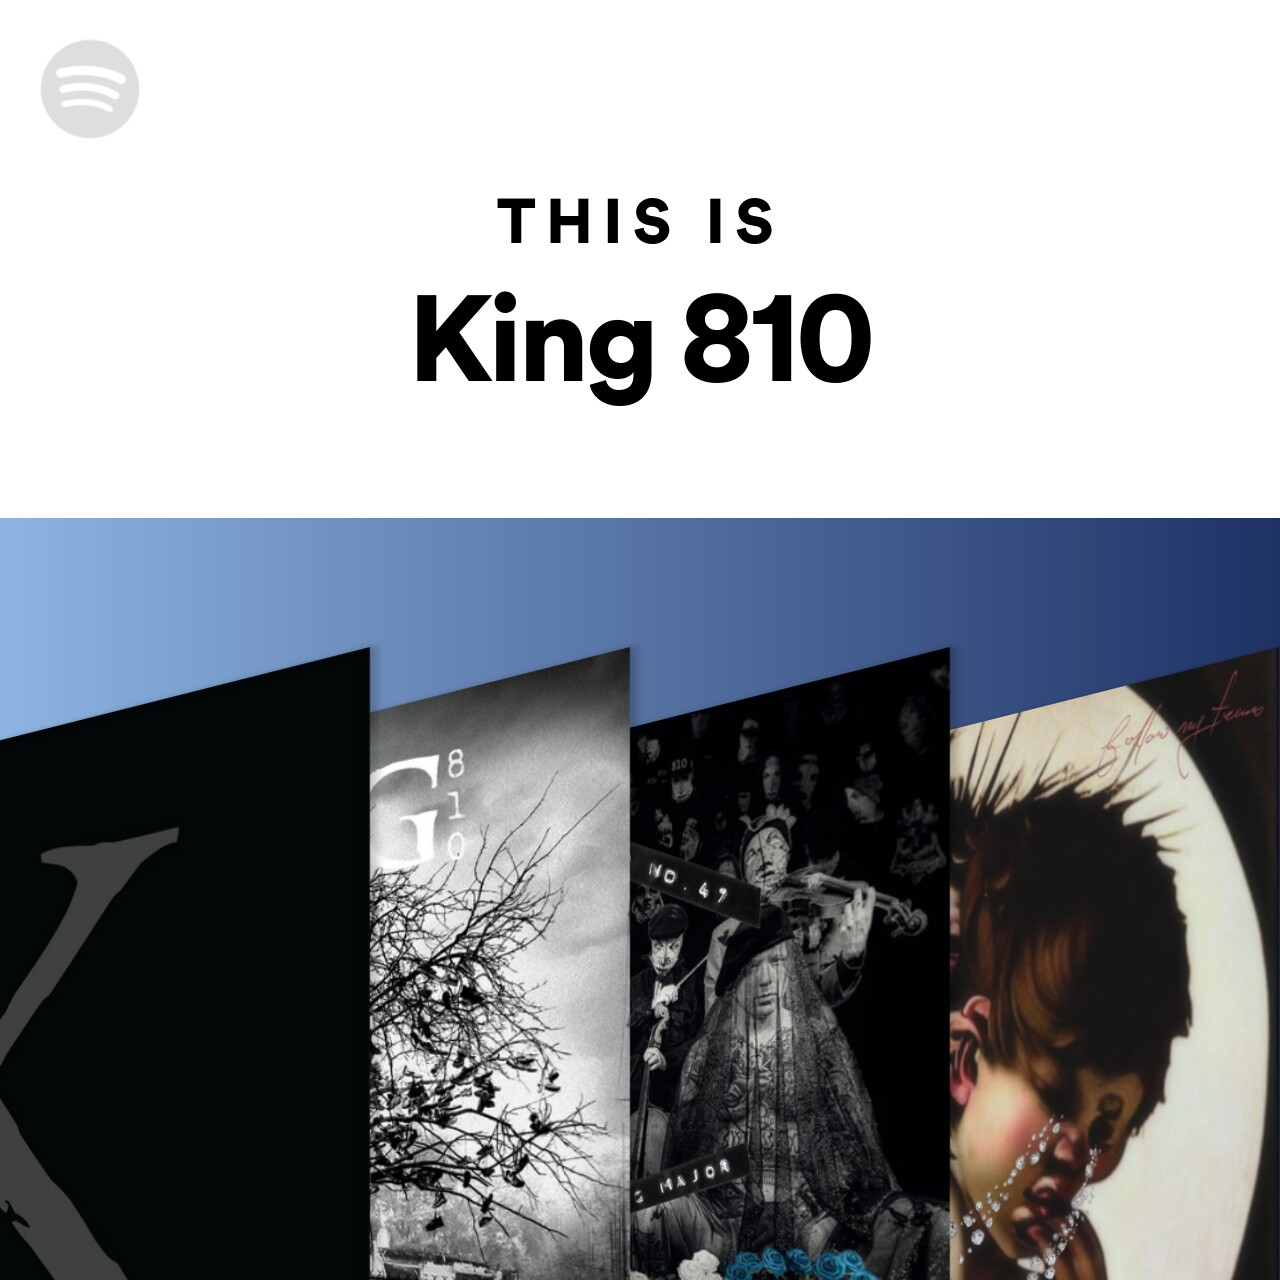 This Is King 810